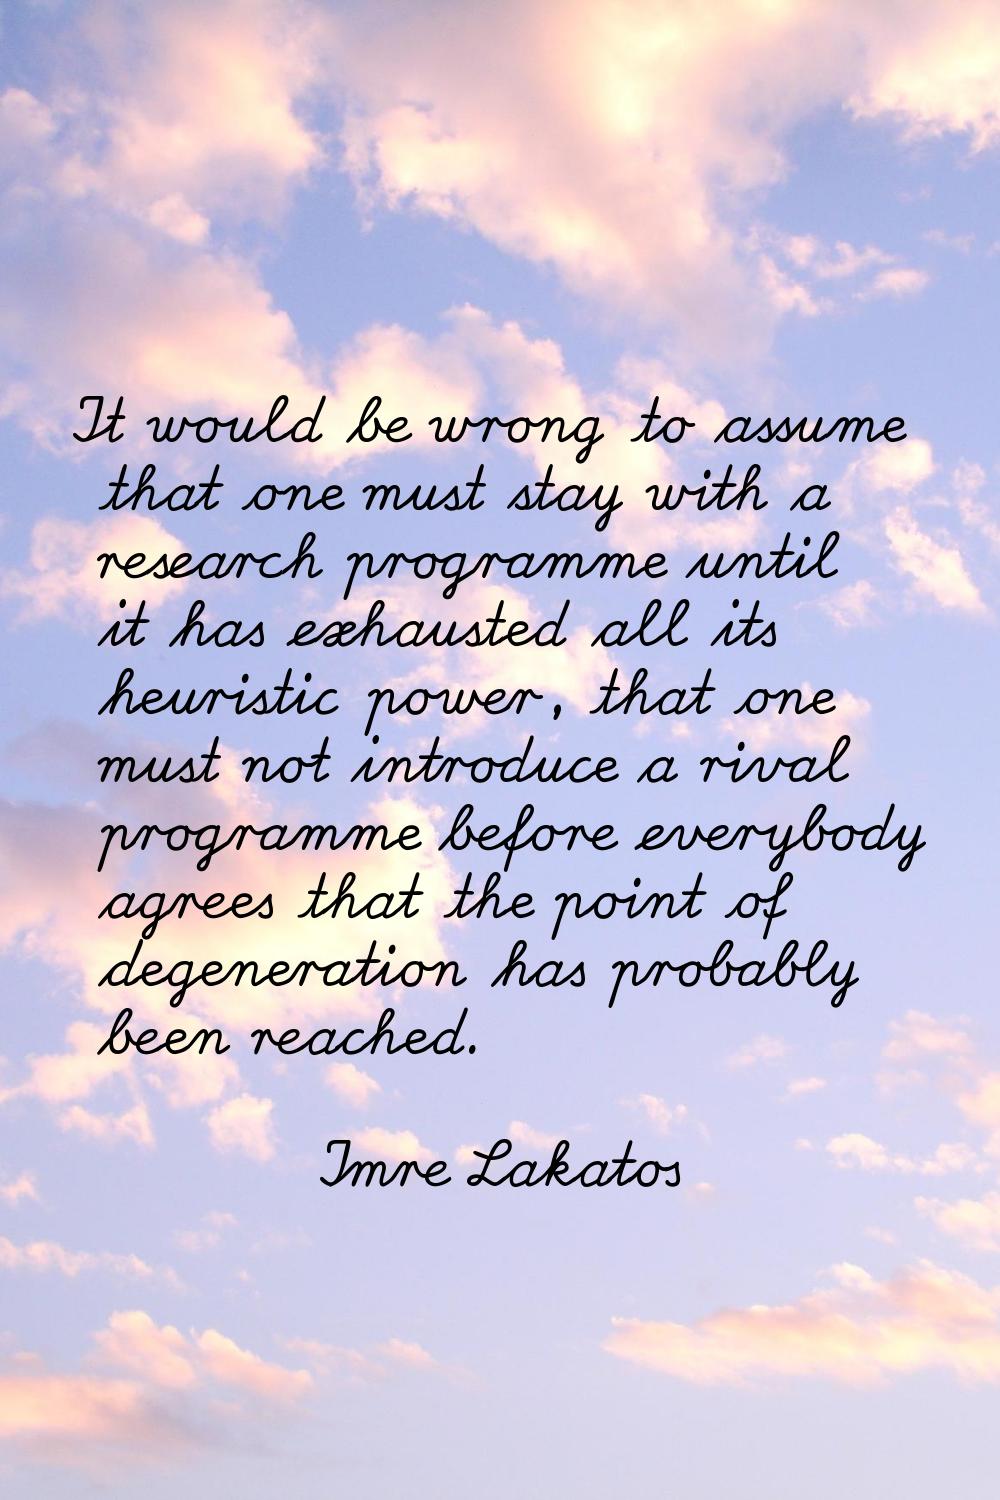 It would be wrong to assume that one must stay with a research programme until it has exhausted all